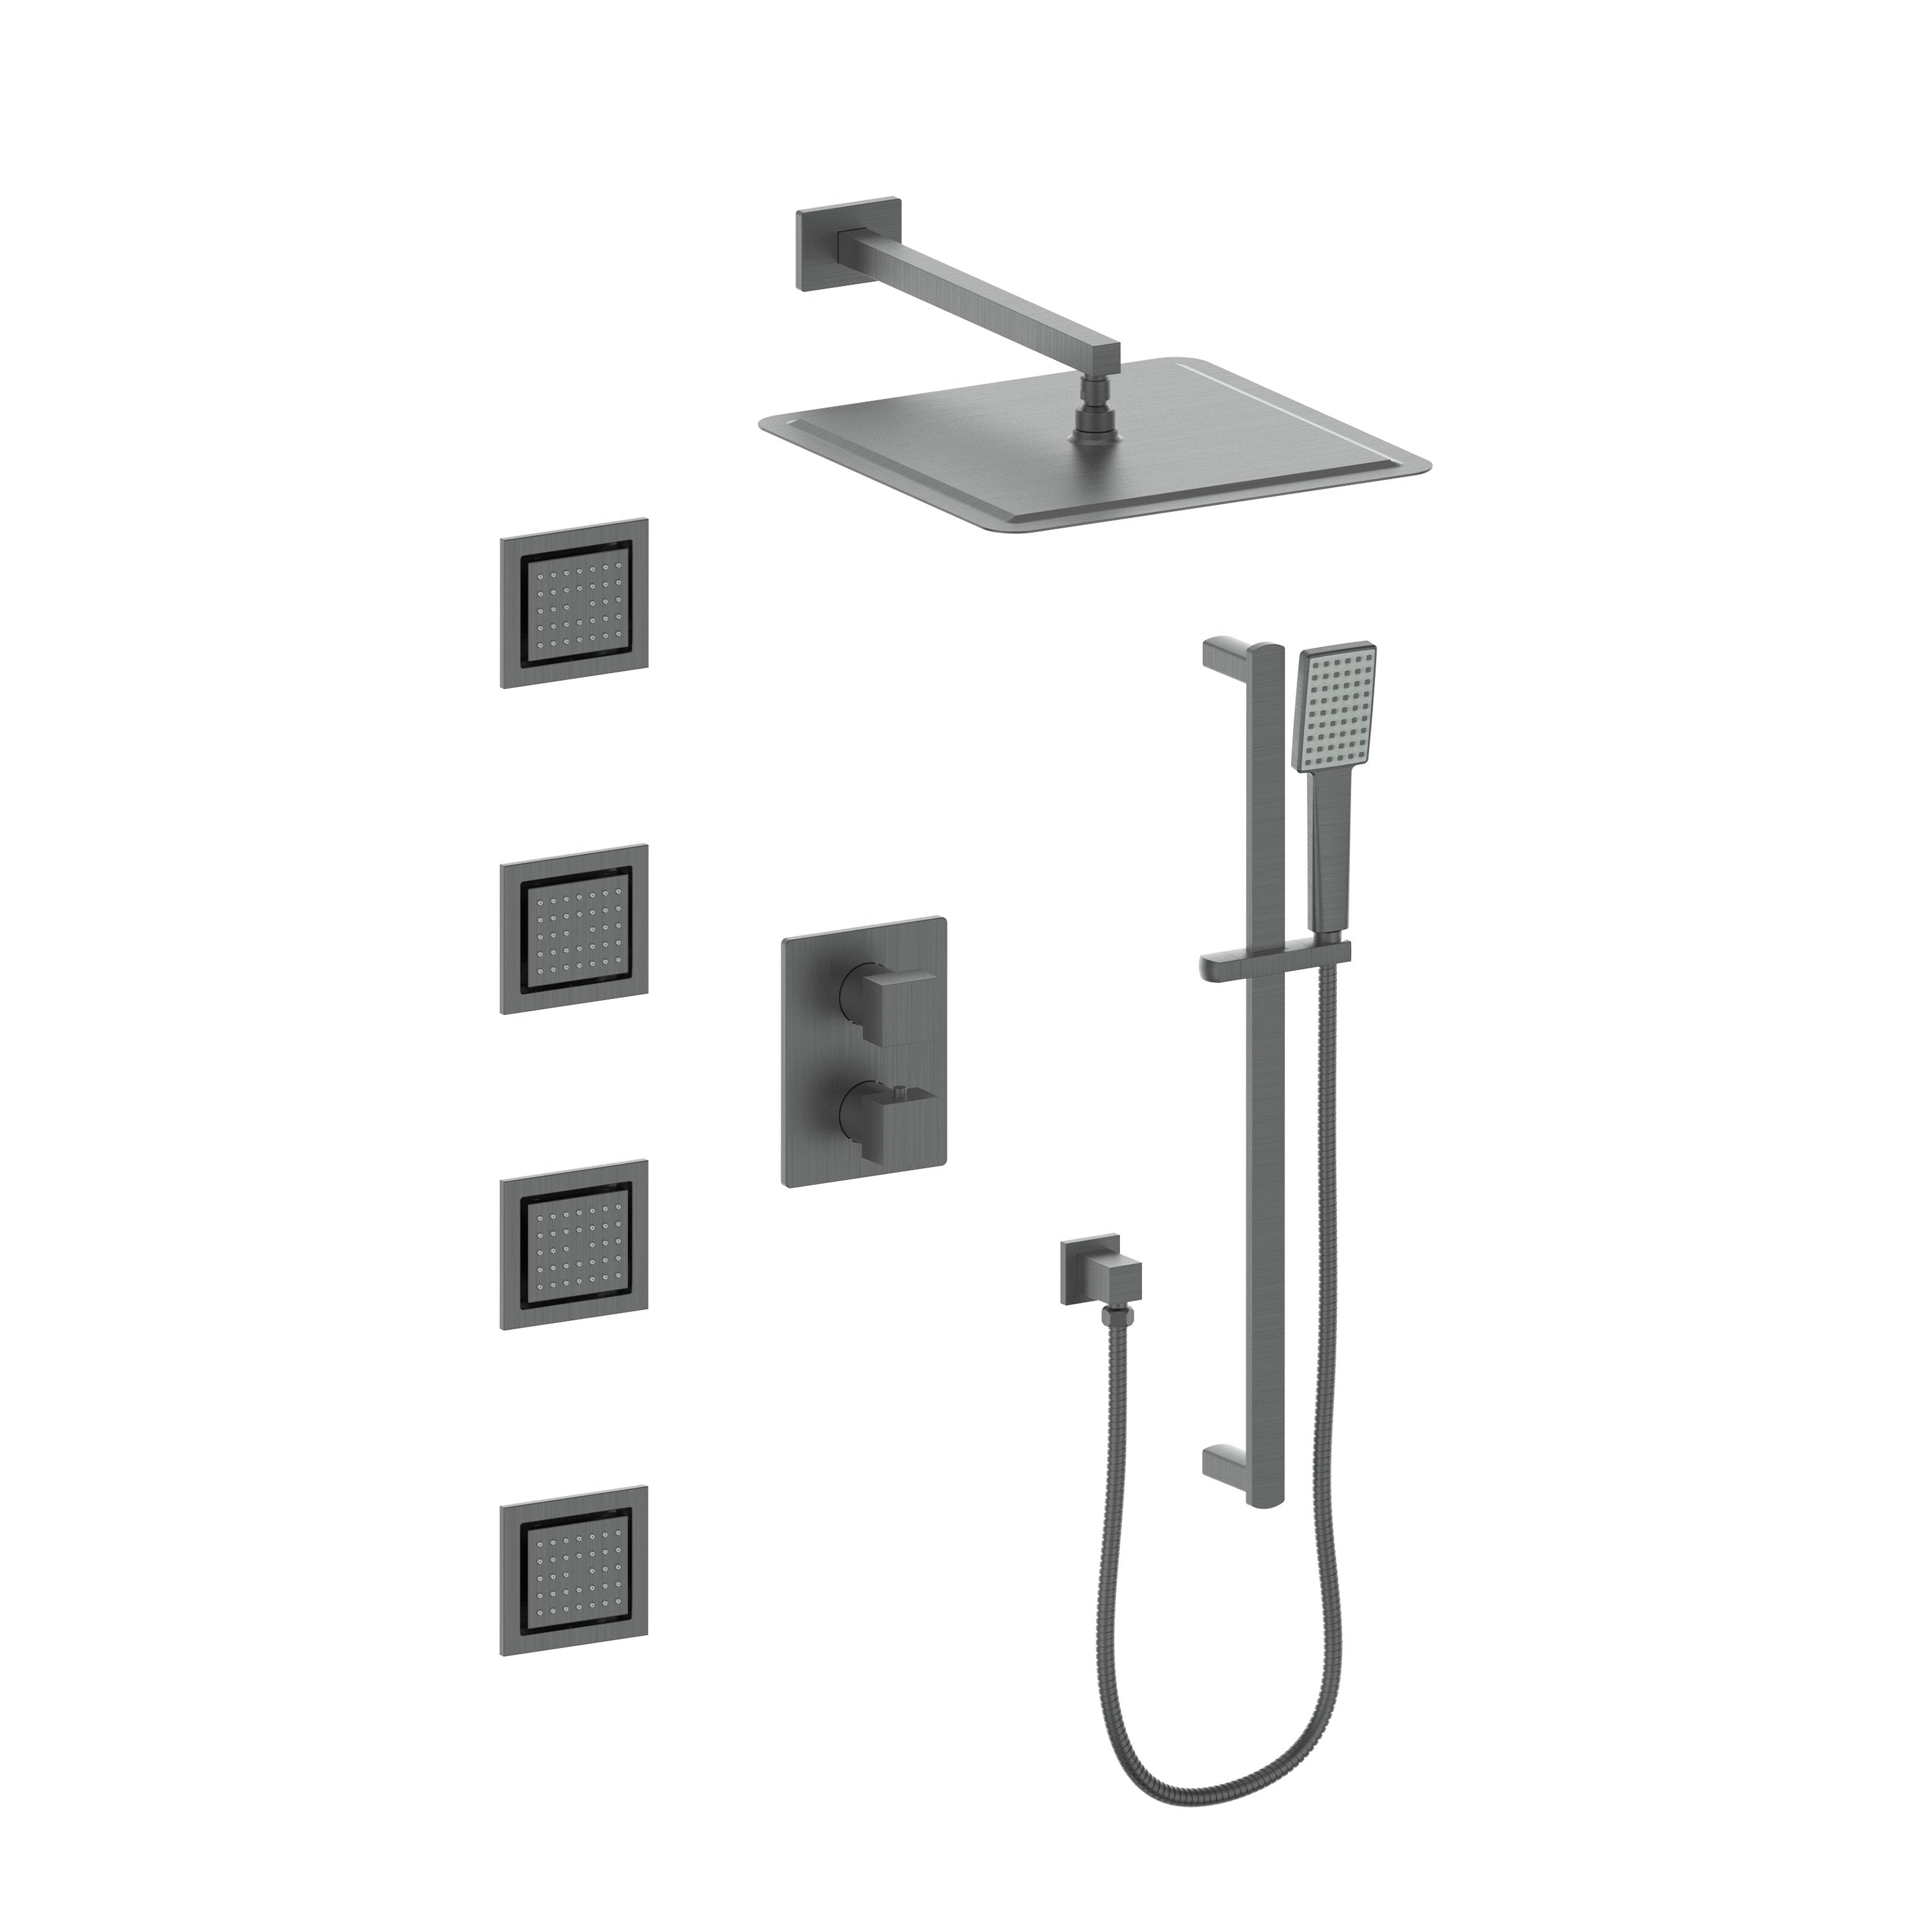 Therangehoodstore.com, ZLINE Crystal Bay Thermostatic Shower System with Body Jets, color options available (CBY-SHS-T3), CBY-SHS-T3-GM,